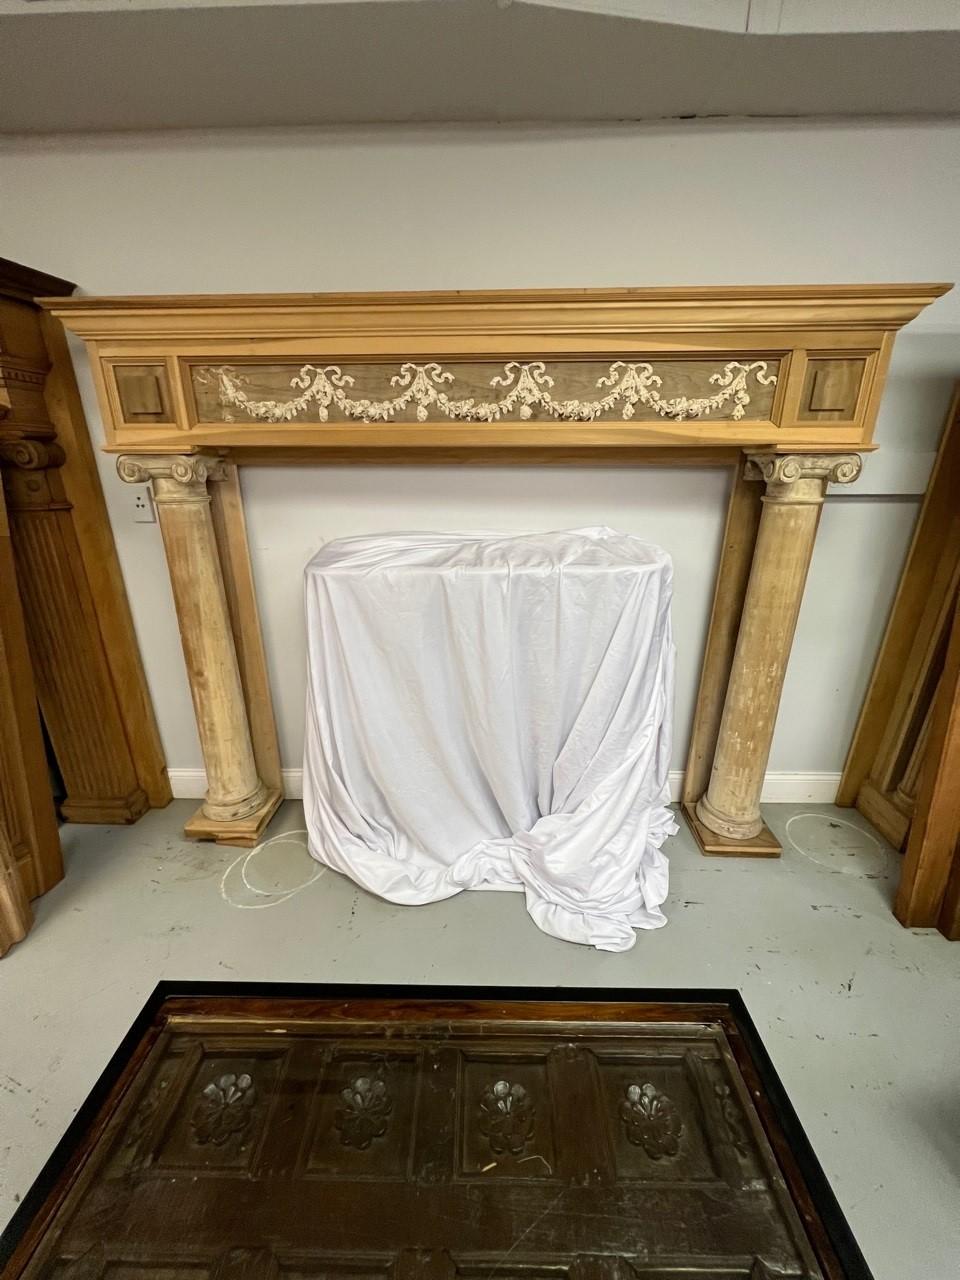 Vintage antique wood fireplace mantel with round columns and a beautiful face with draped ribbons and flowers. This is a very nice mantel with the full columns raise panels and decorative face that would be a great focal point in any room of your